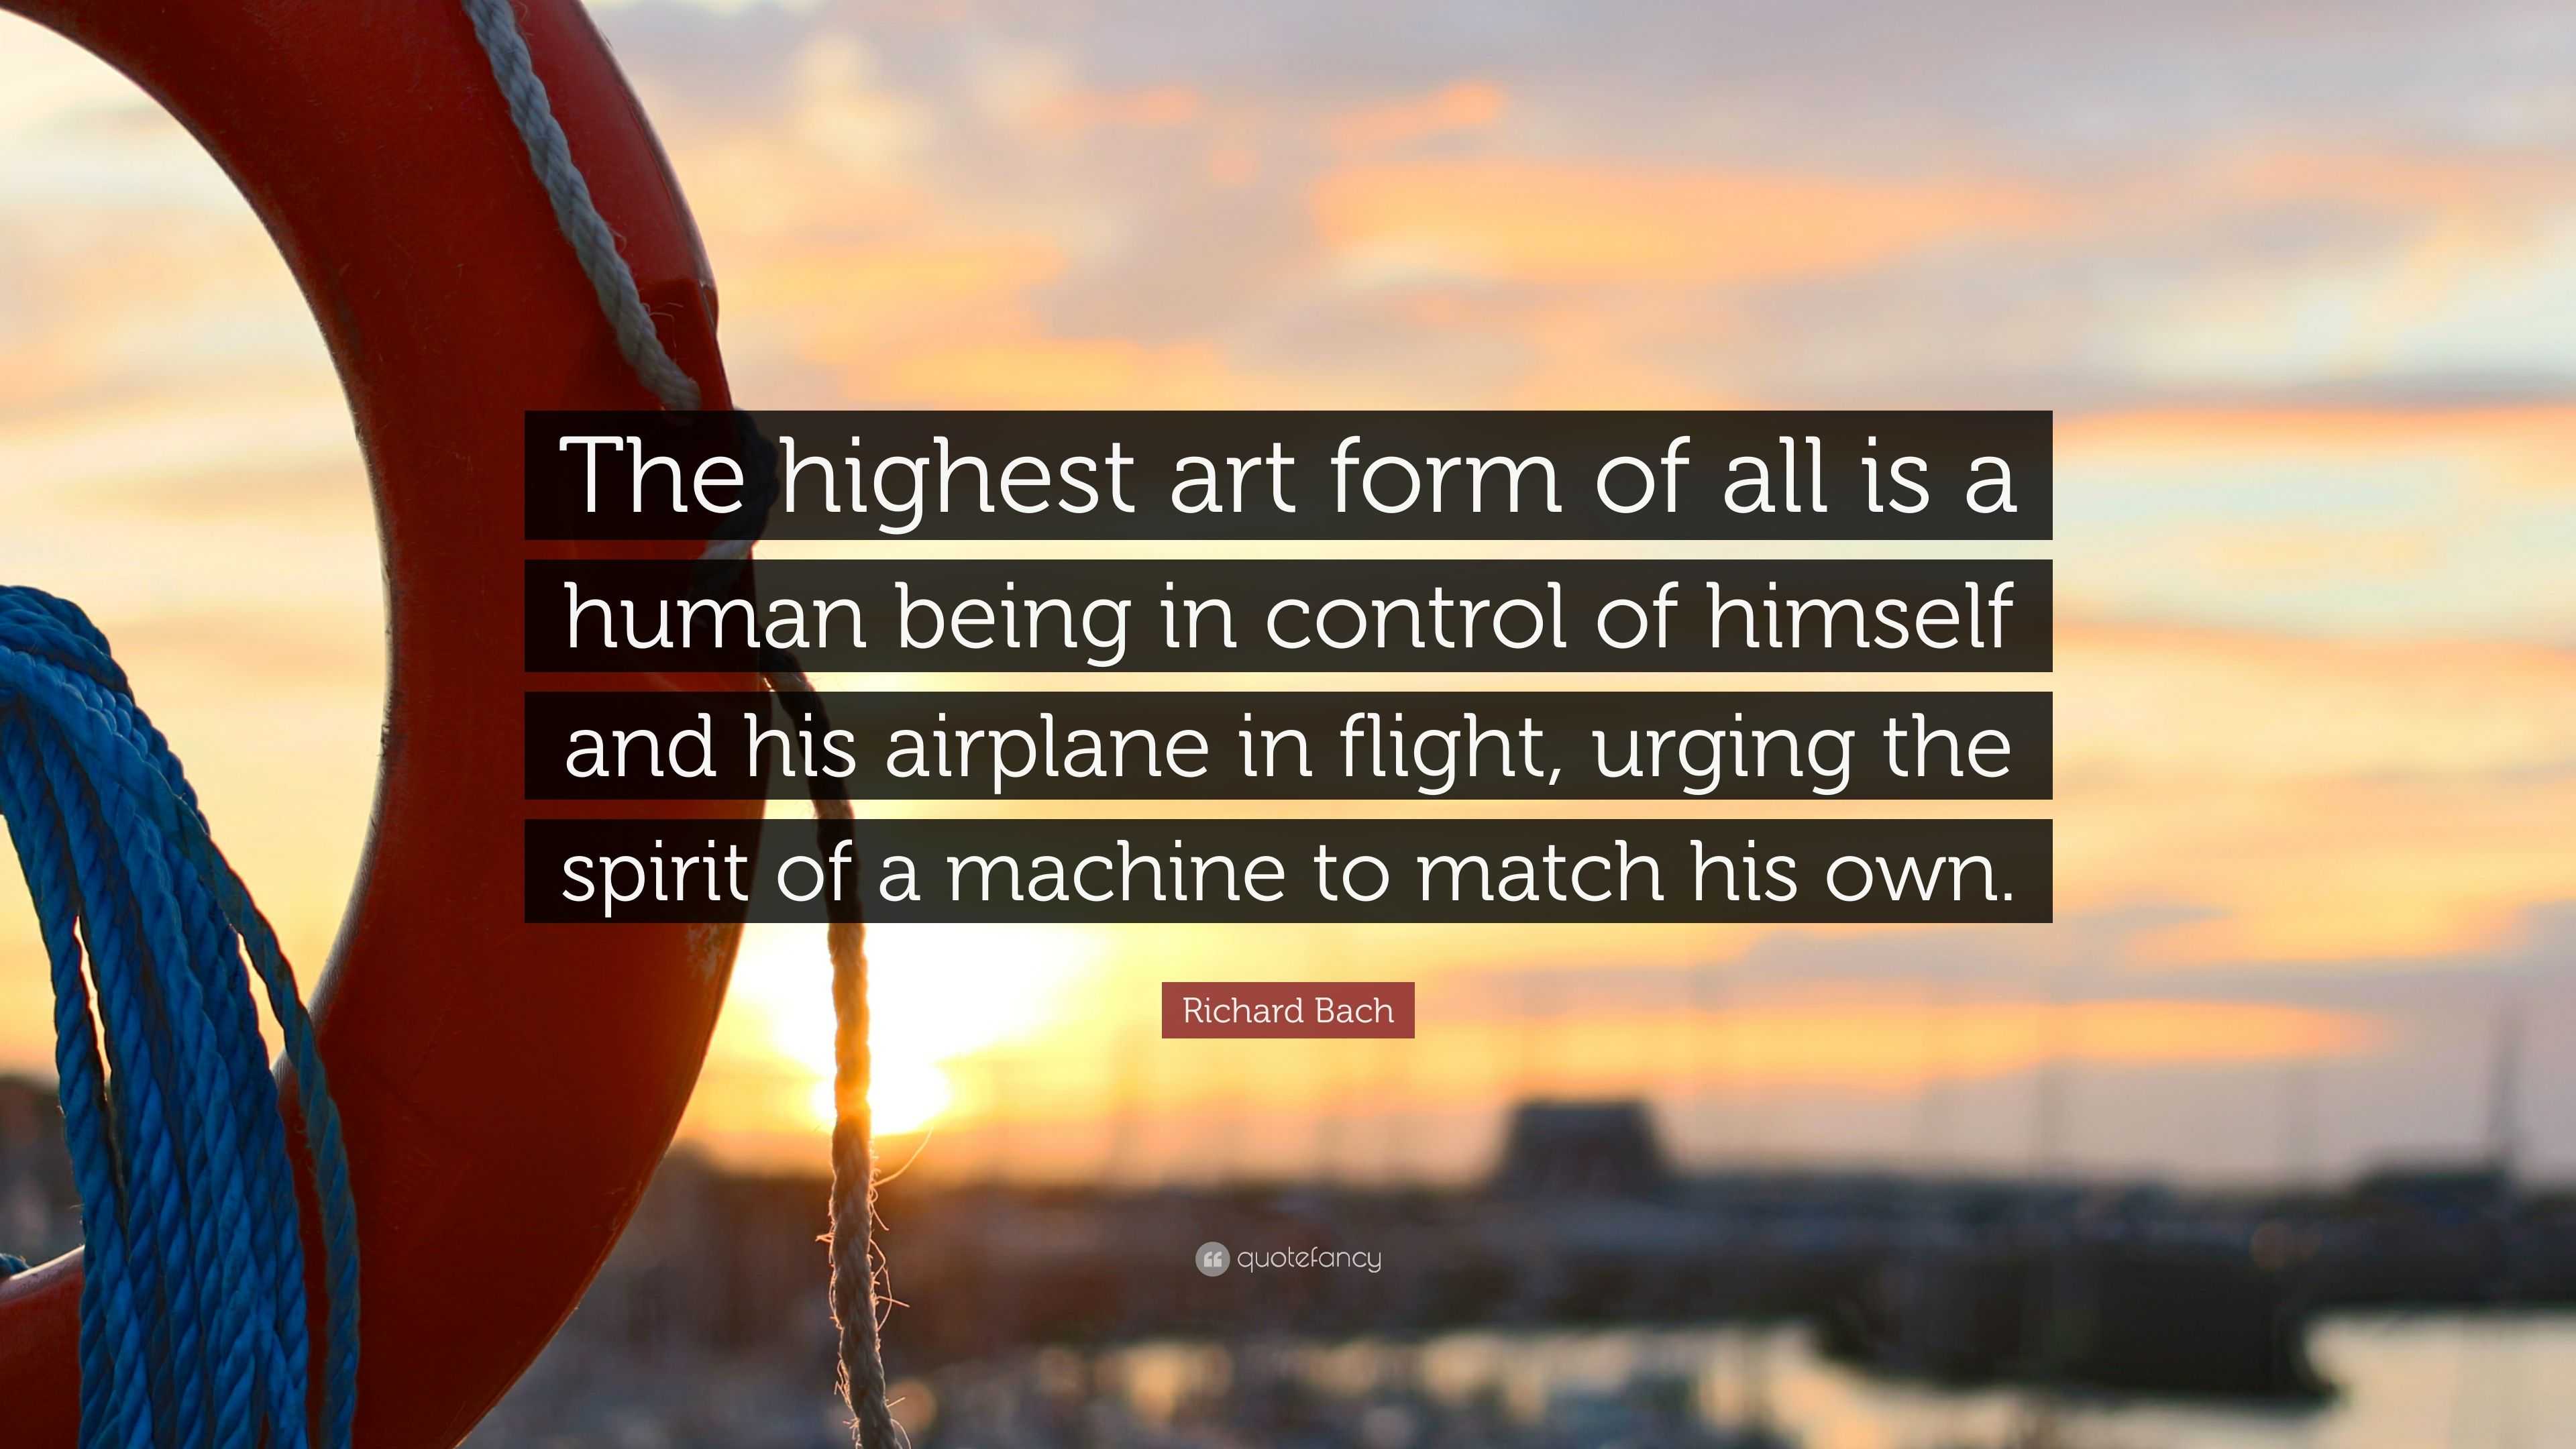 Richard Bach Quote: “The highest art form of all is a human being in control  of himself and his airplane in flight, urging the spirit of a ma”